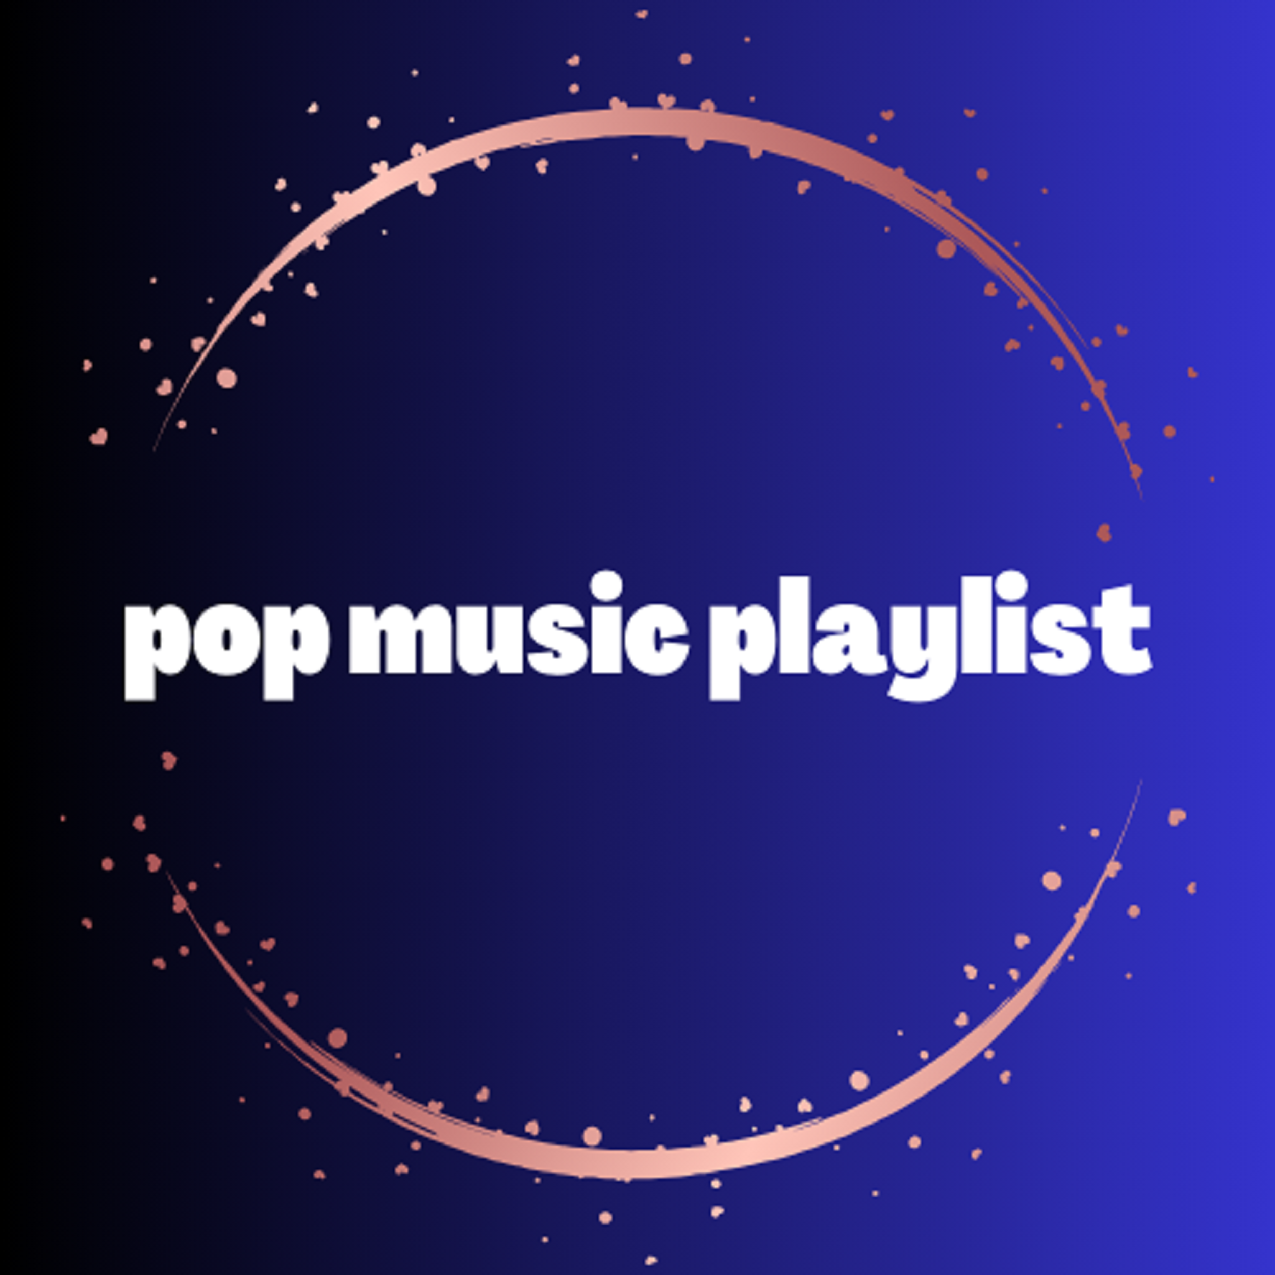 New songs added to Pop Music Playlist.